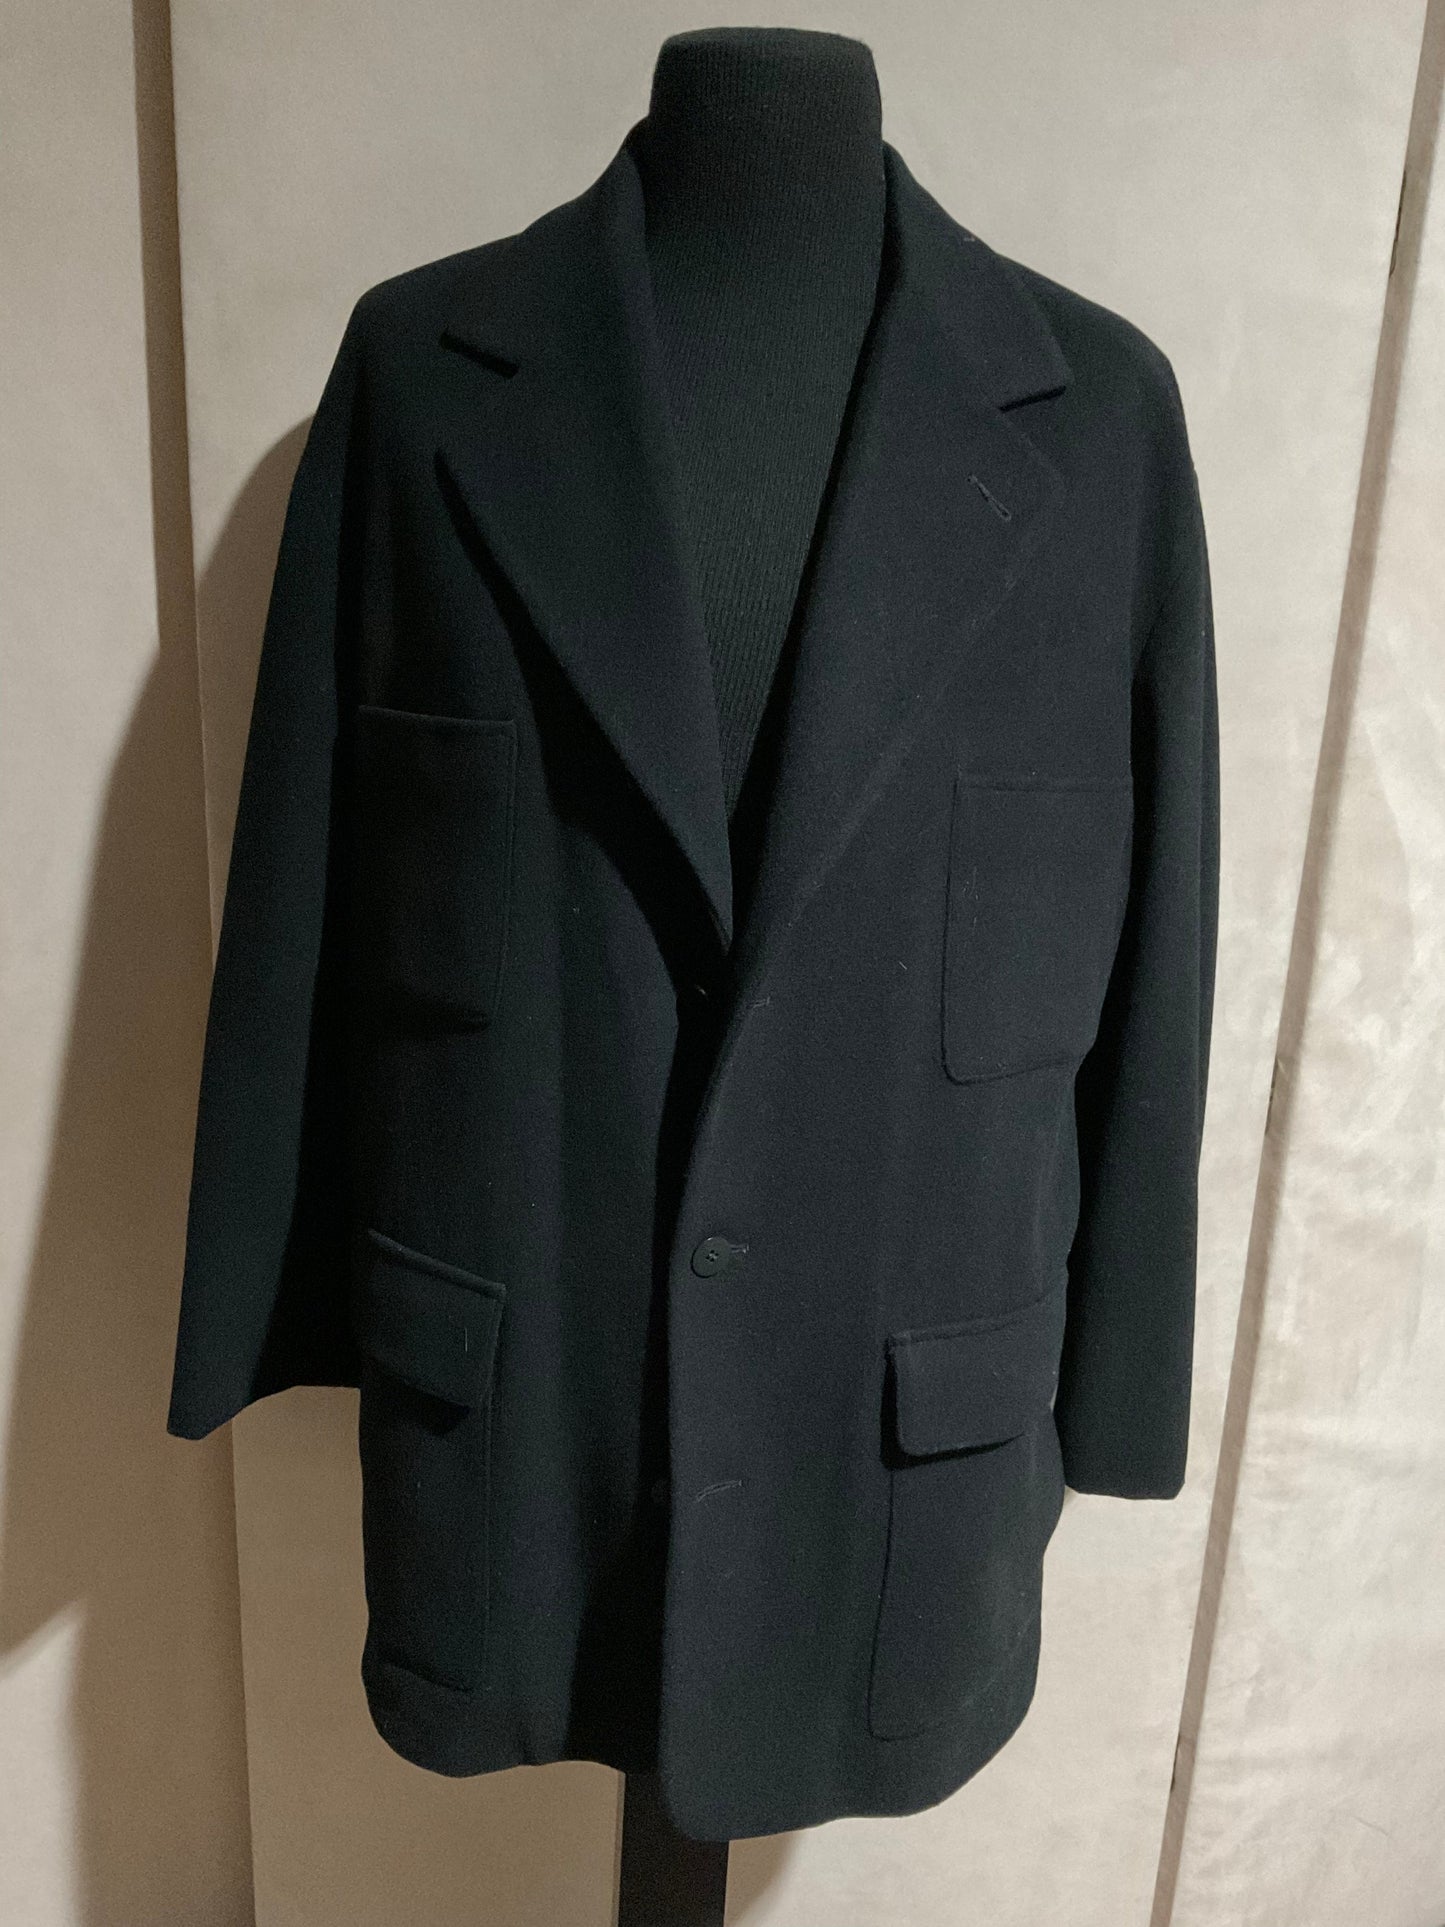 R P JACKET / OUTERWEAR / BLACK WOOL / MEDIUM - LARGE / NEW / MADE IN CANADA